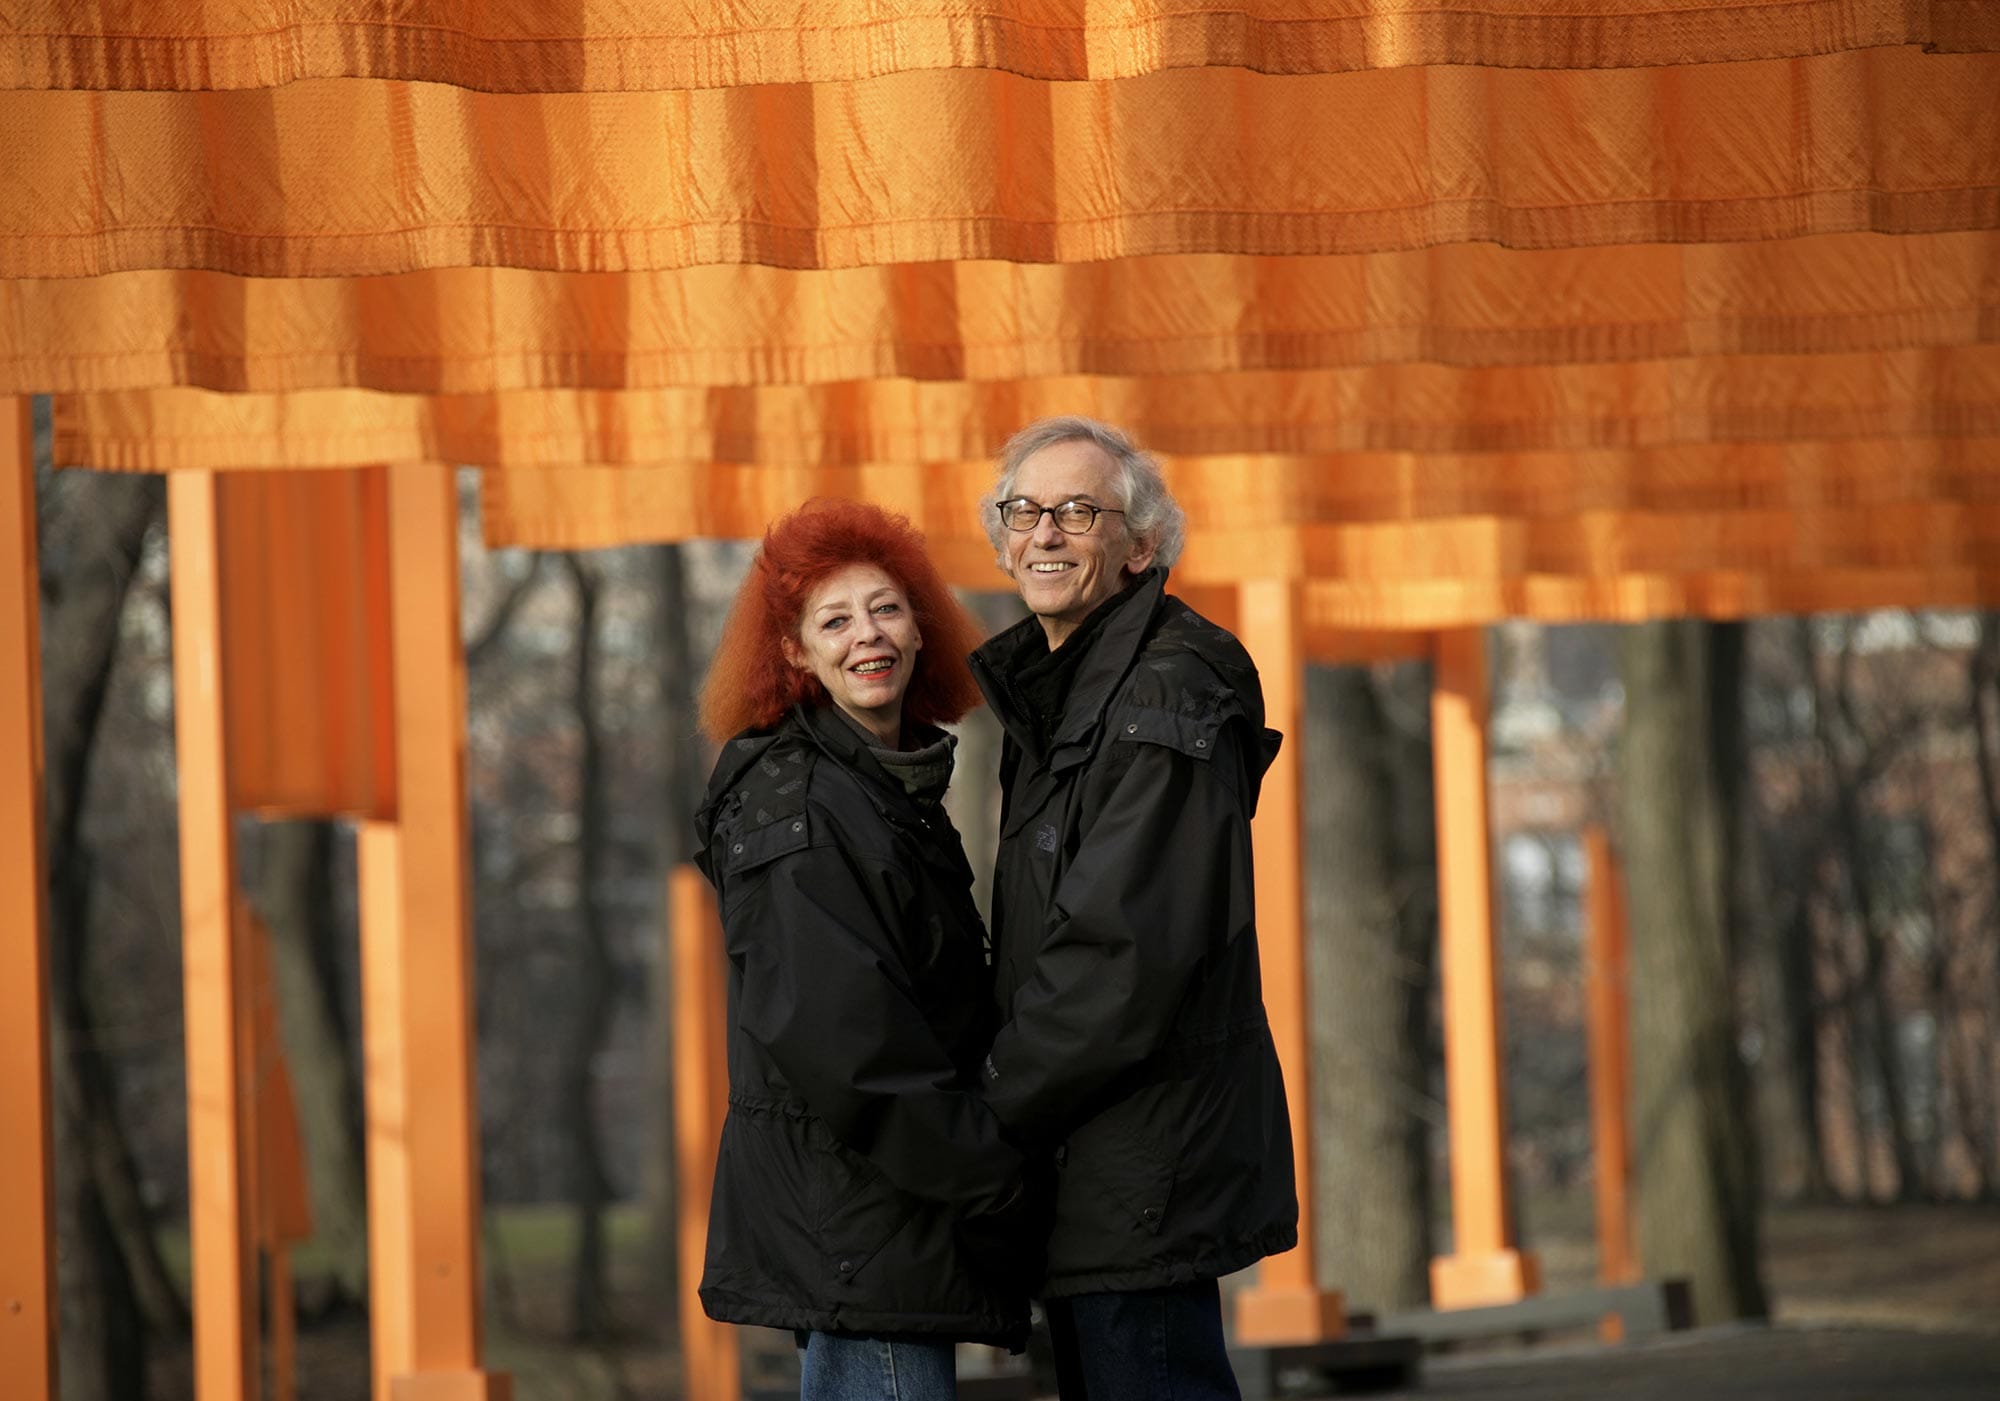 Christo and Jeanne-Claude during their work of art "The Gates," Central Park, New York City, in 2005.